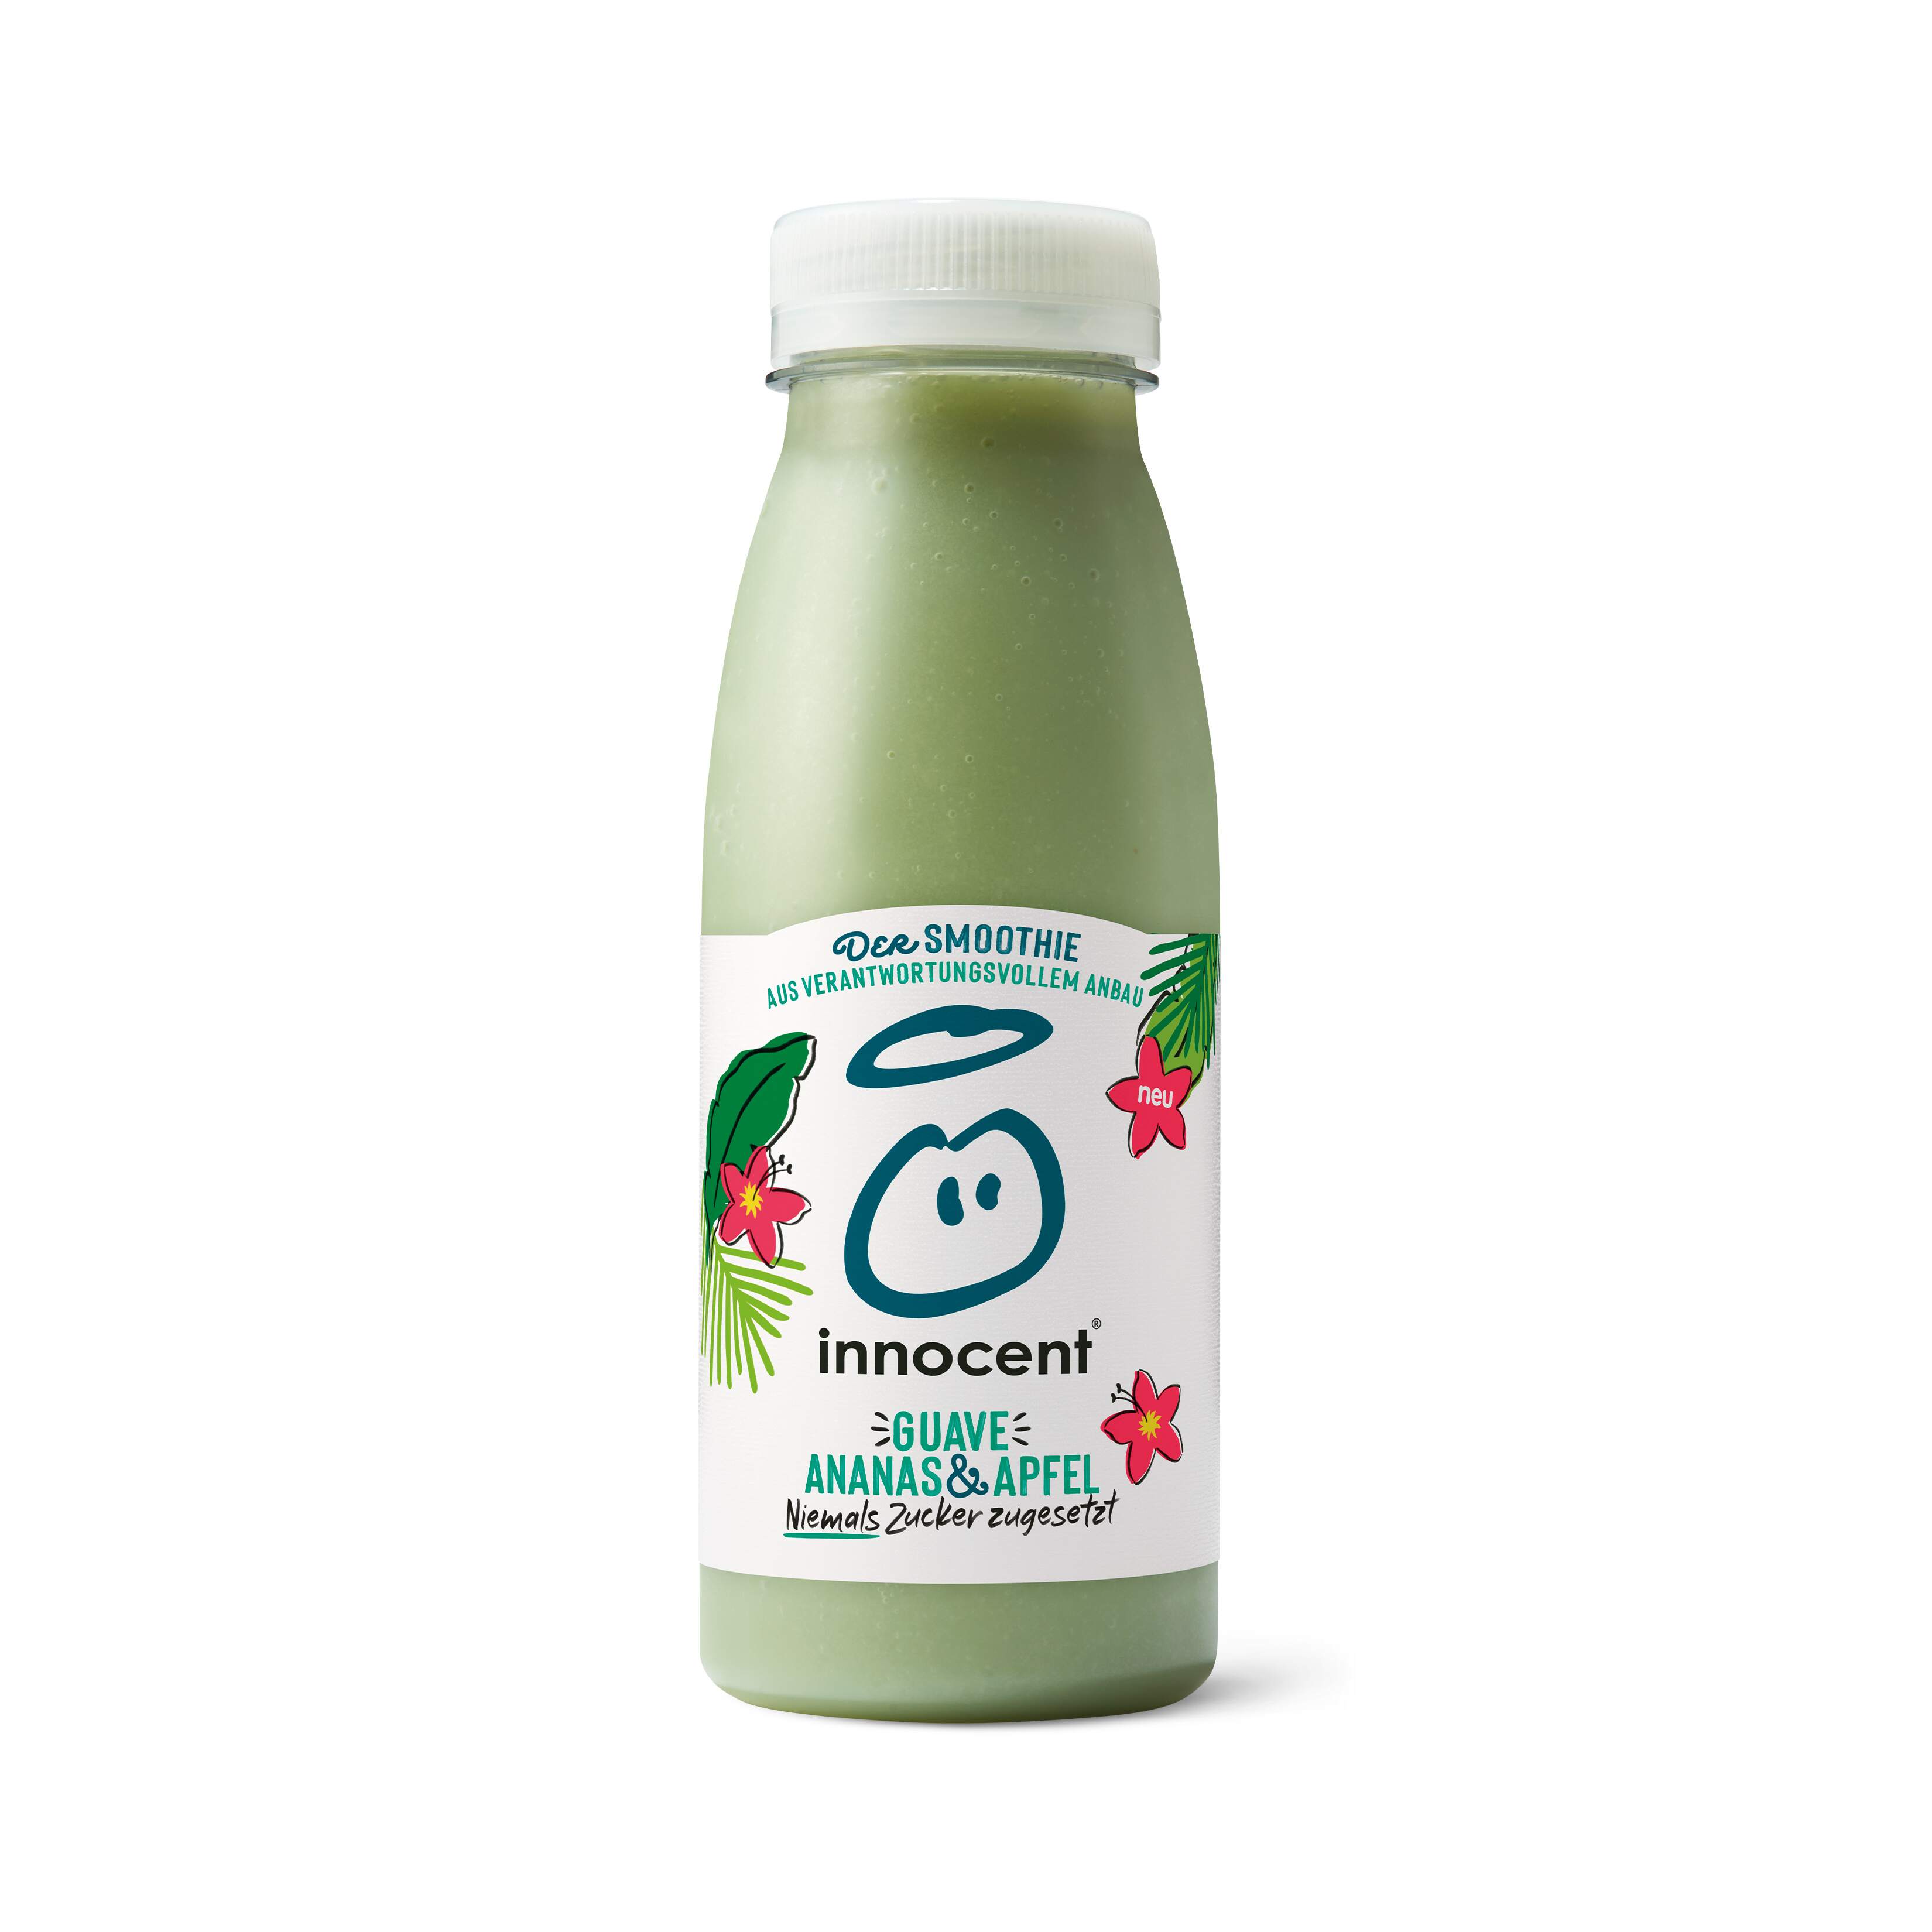 Guave Ananas Apfel Smoothie 250ml